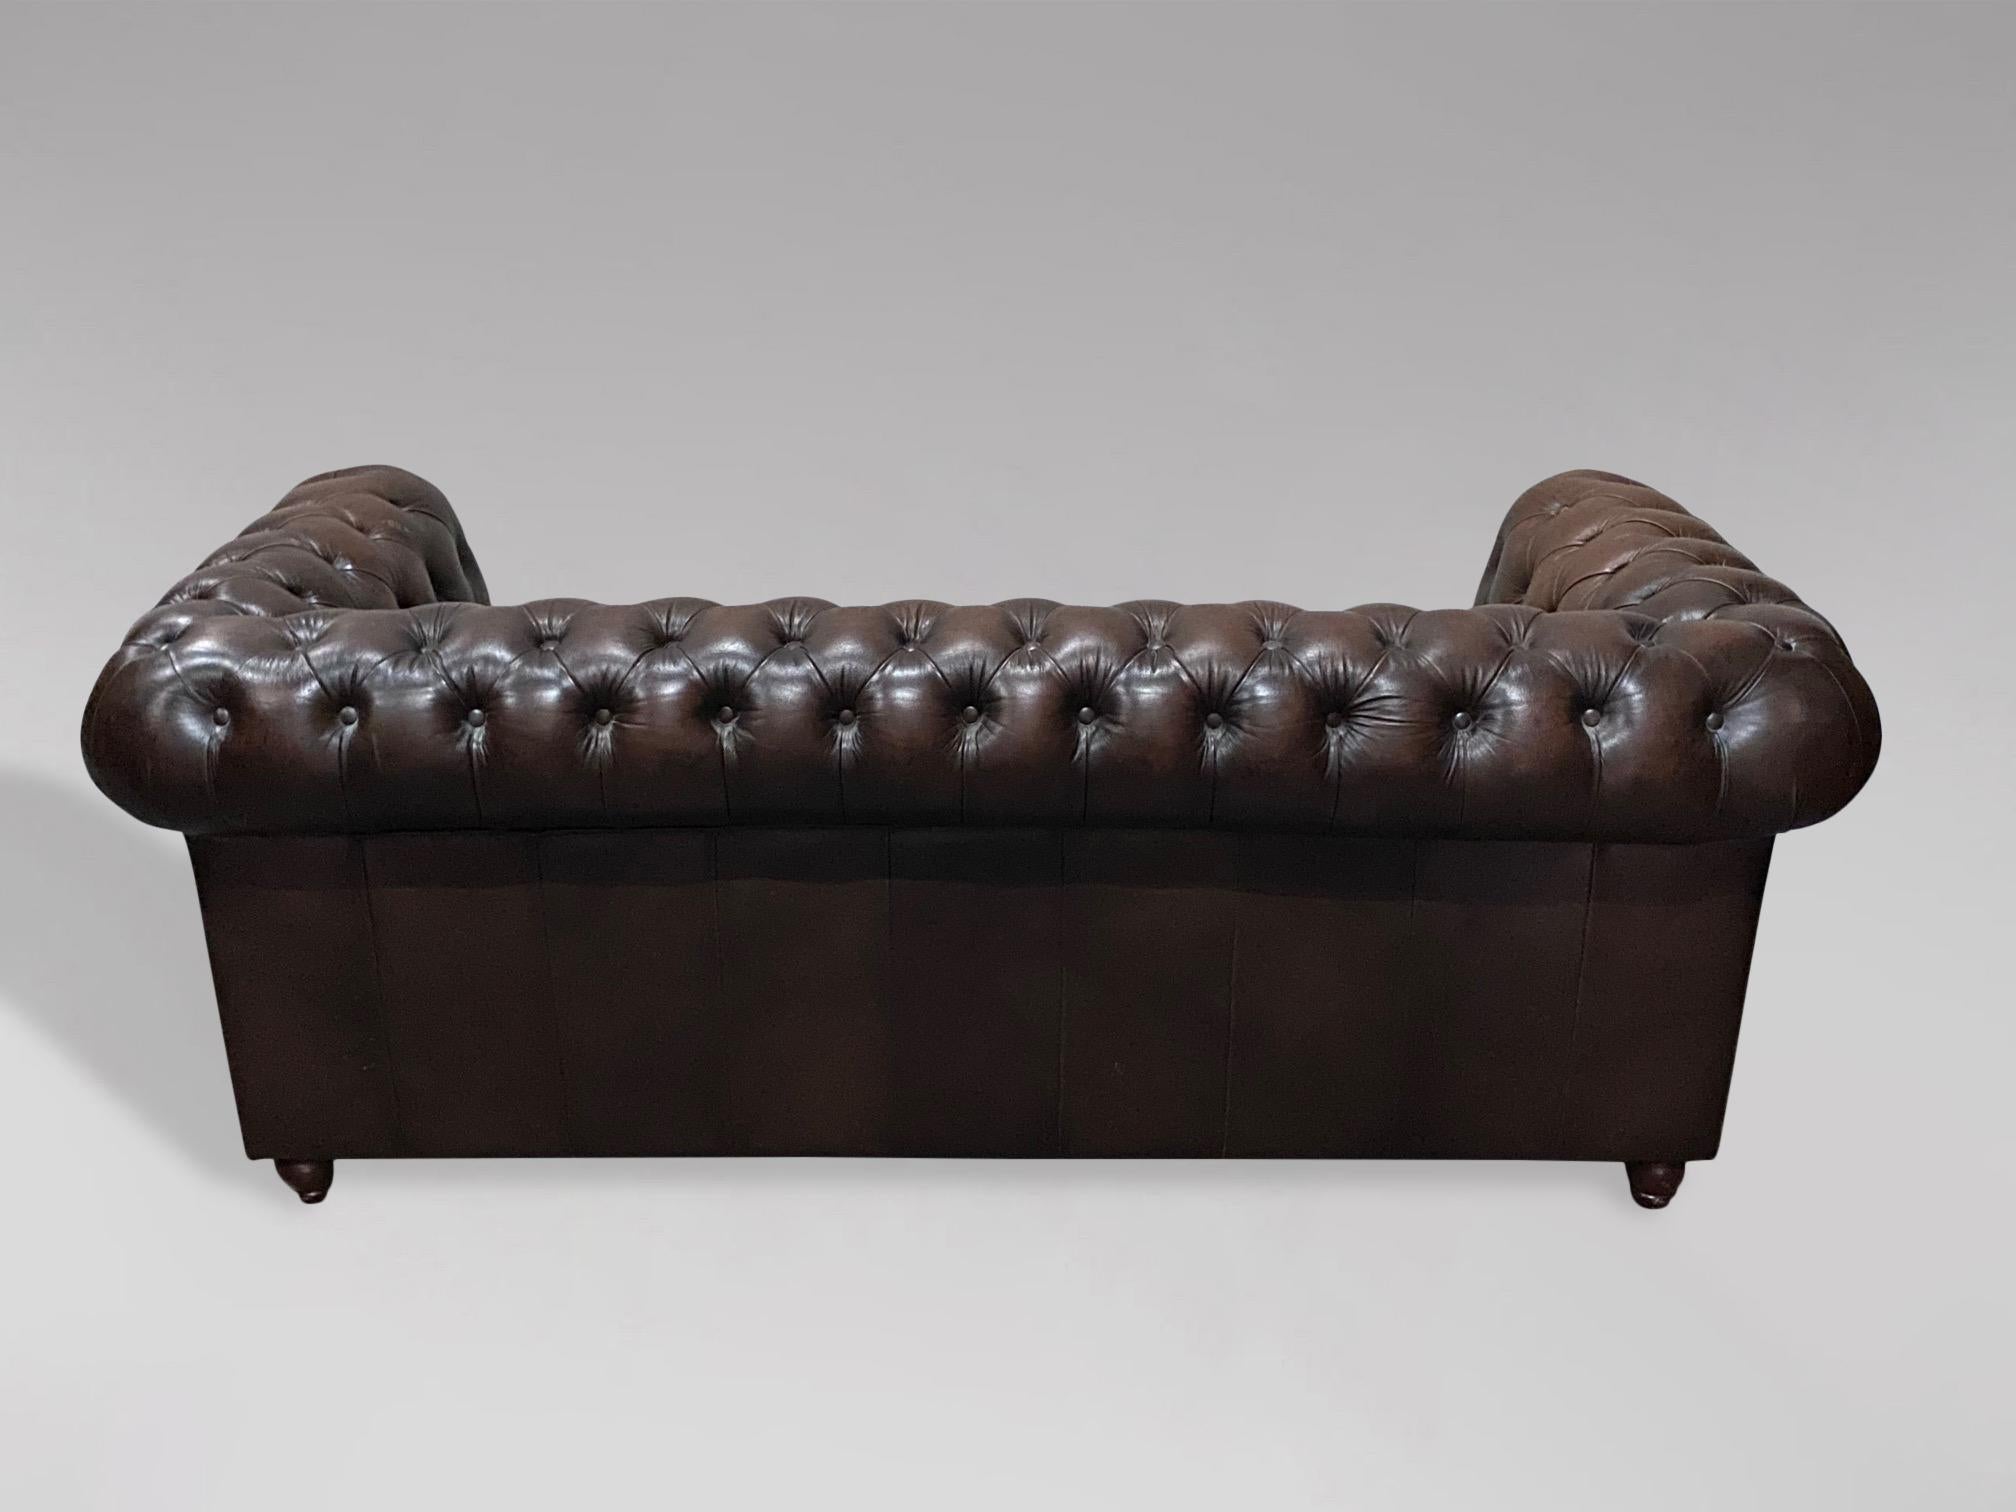 20th Century Vintage Brown Leather Three Seater Chesterfield Sofa In Good Condition In Petworth,West Sussex, GB